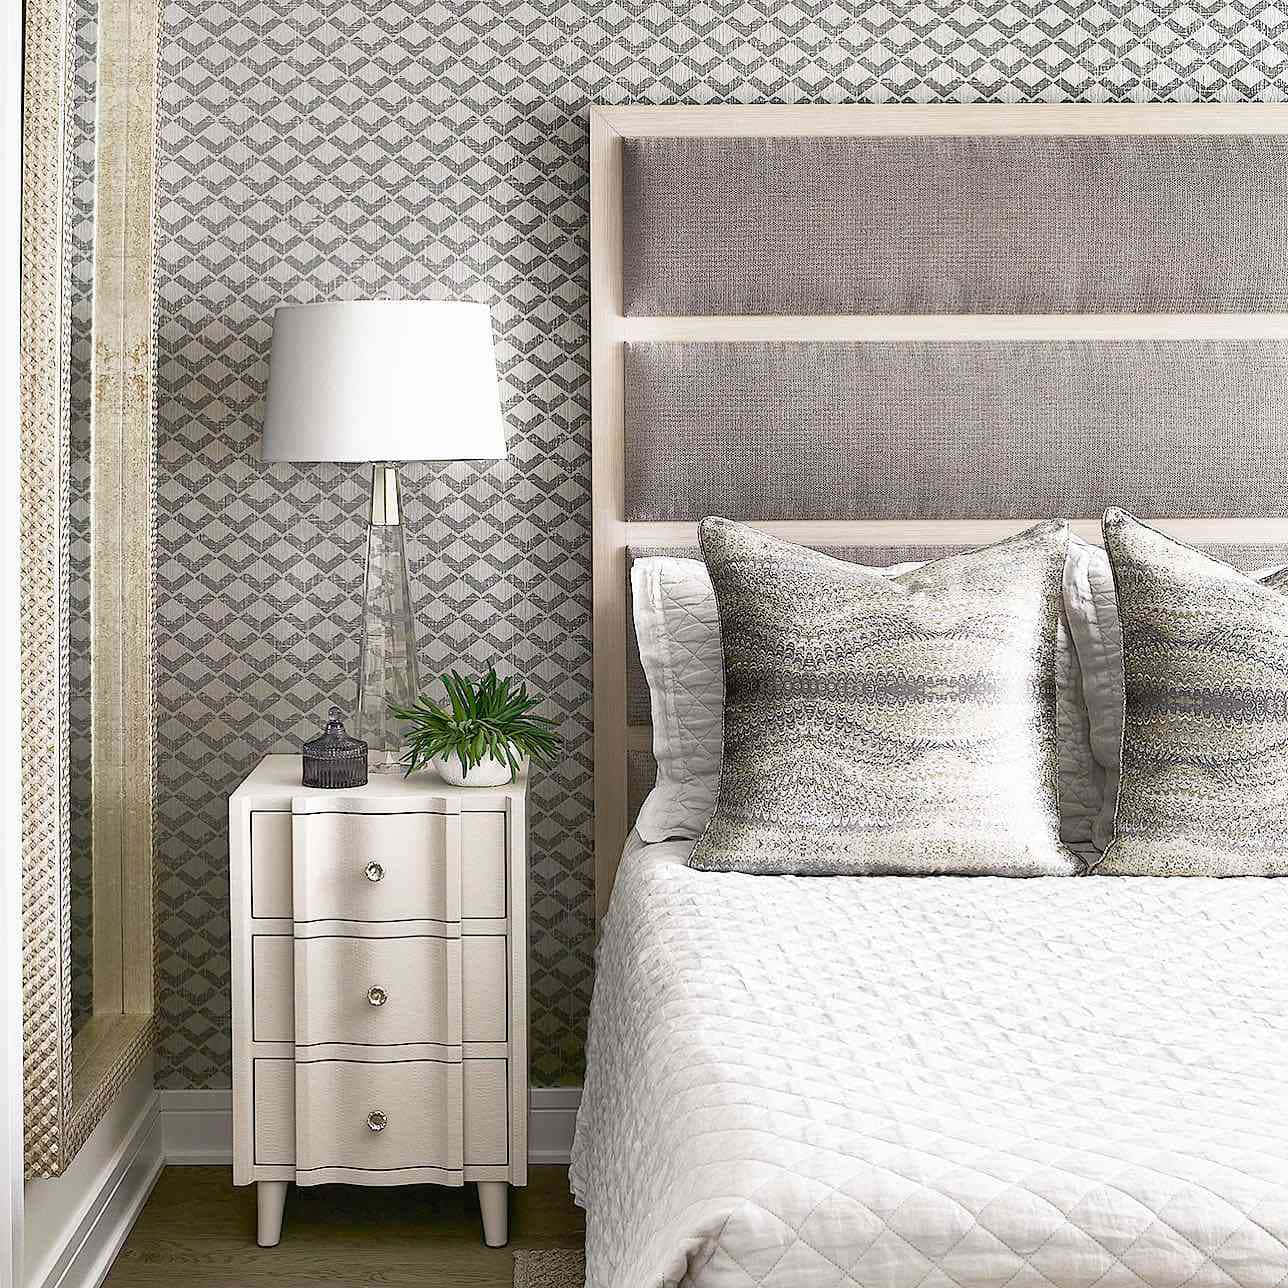 Neat And Clean Bedroom With A Subtle Interior Design Wallpaper